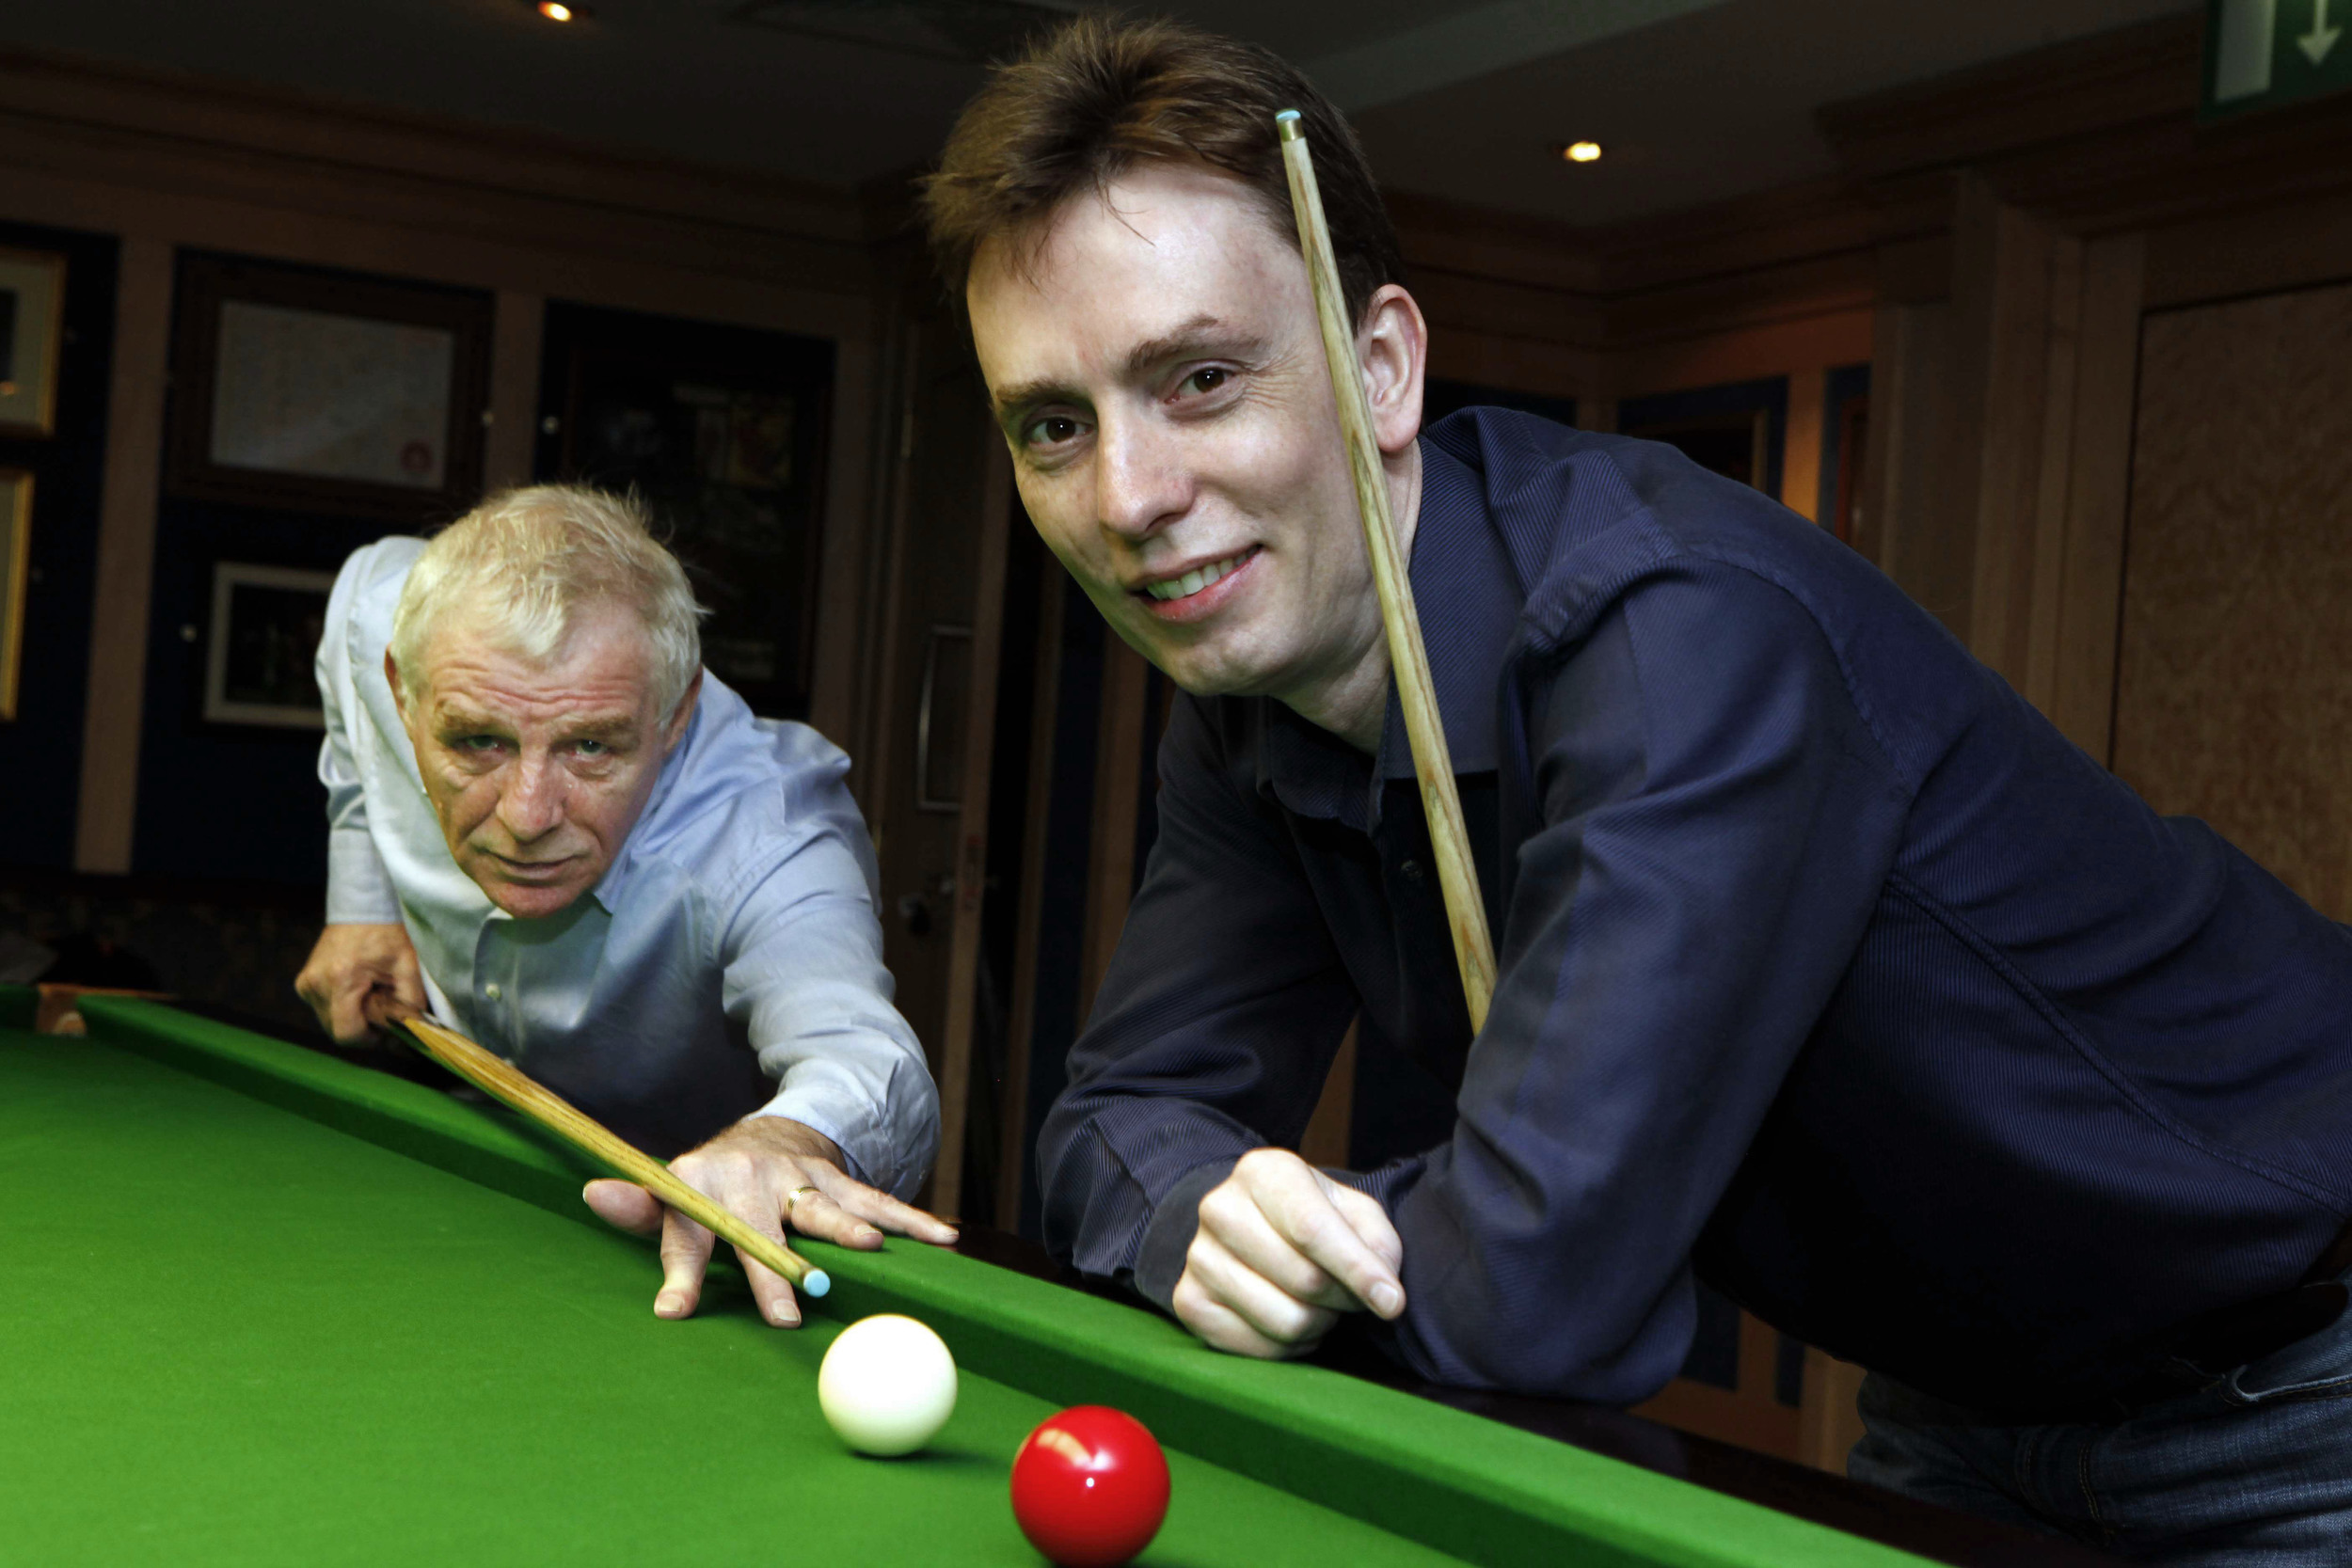  Journalist Eamon Dunphy with former world snooker champion Ken Doherty 